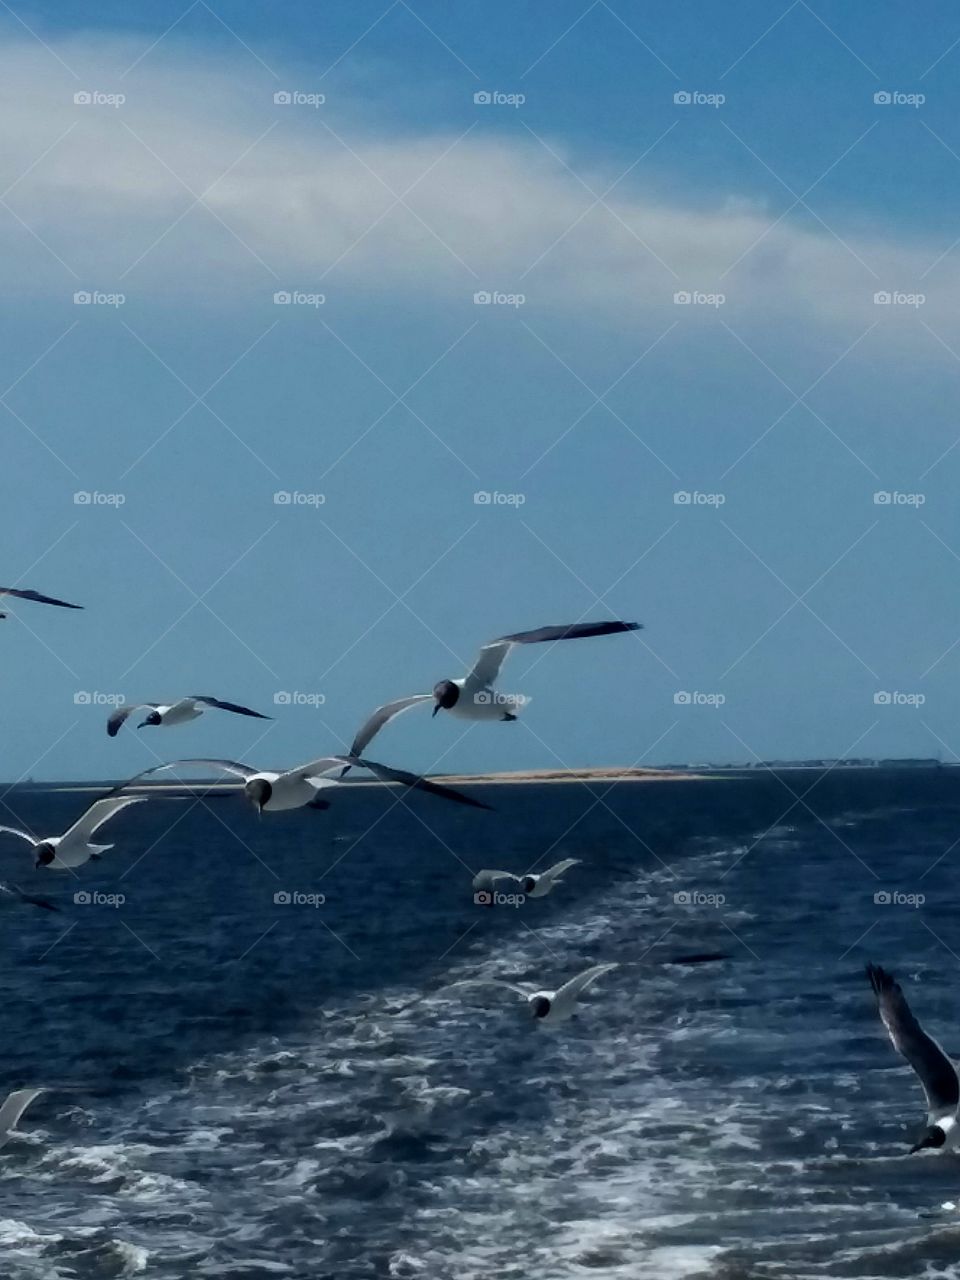 Seagulls flying above a royal blue sea